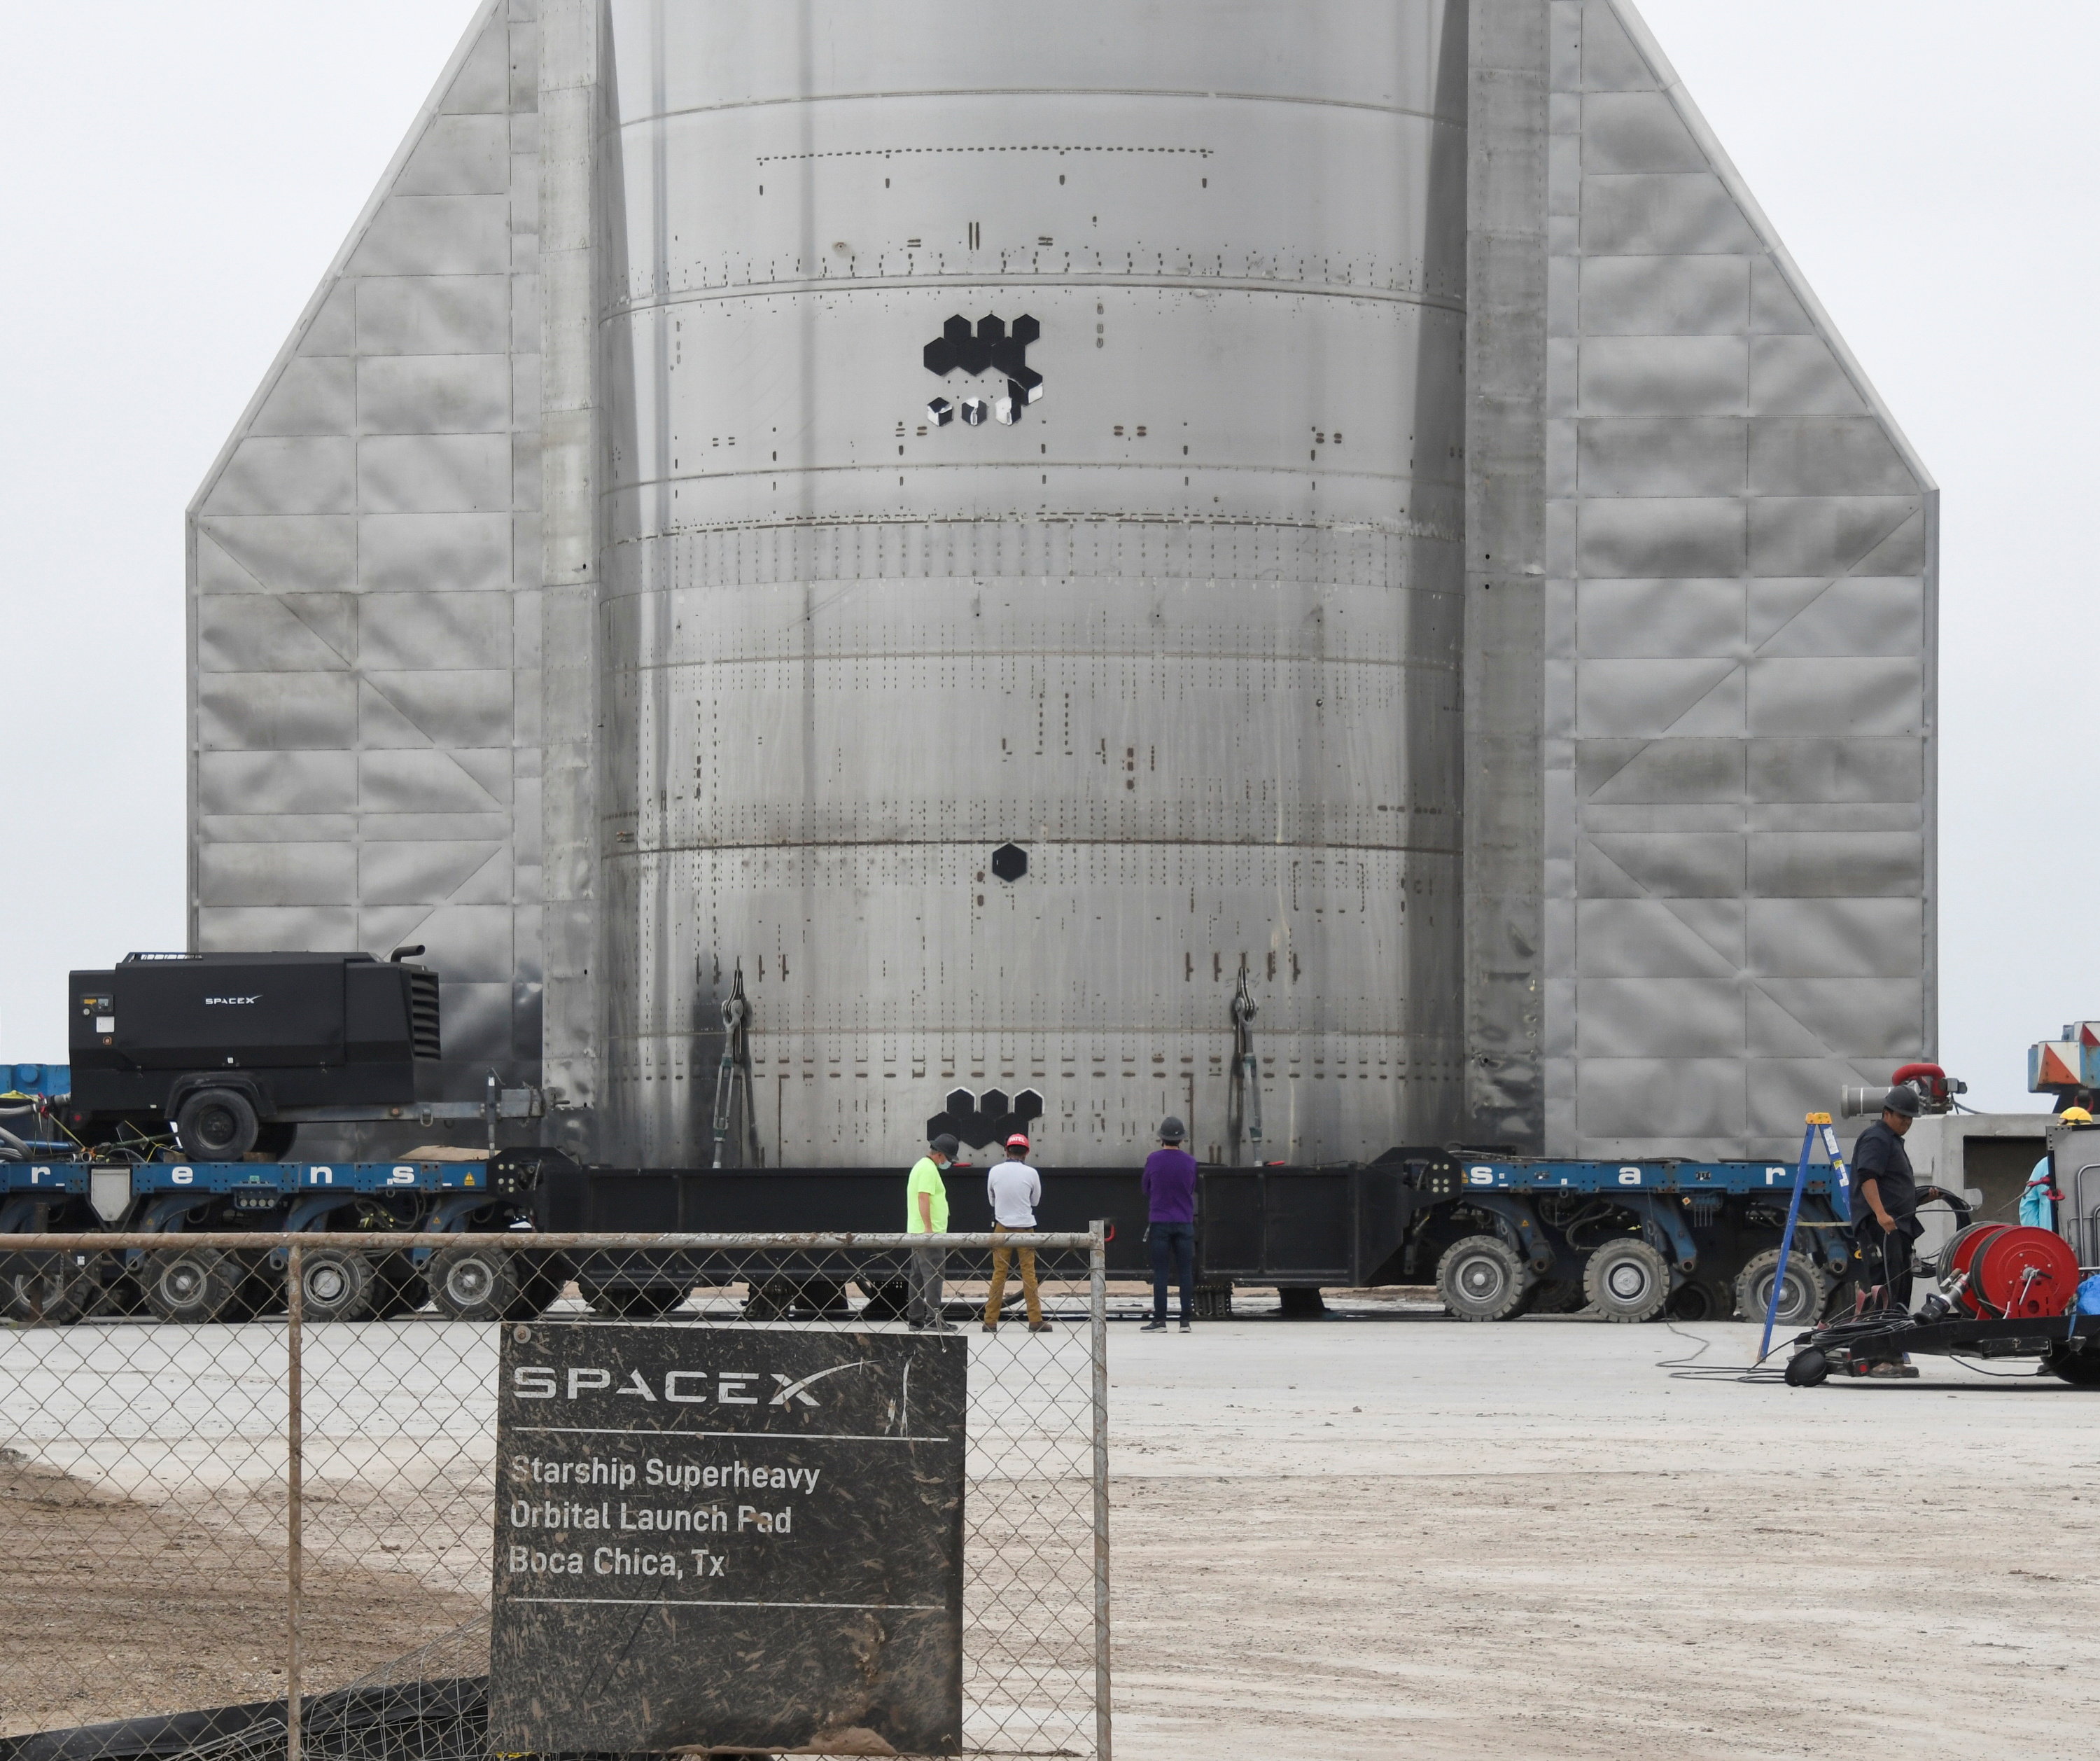 U.S. warns SpaceX its new Texas launch site tower not yet approved - Reuters